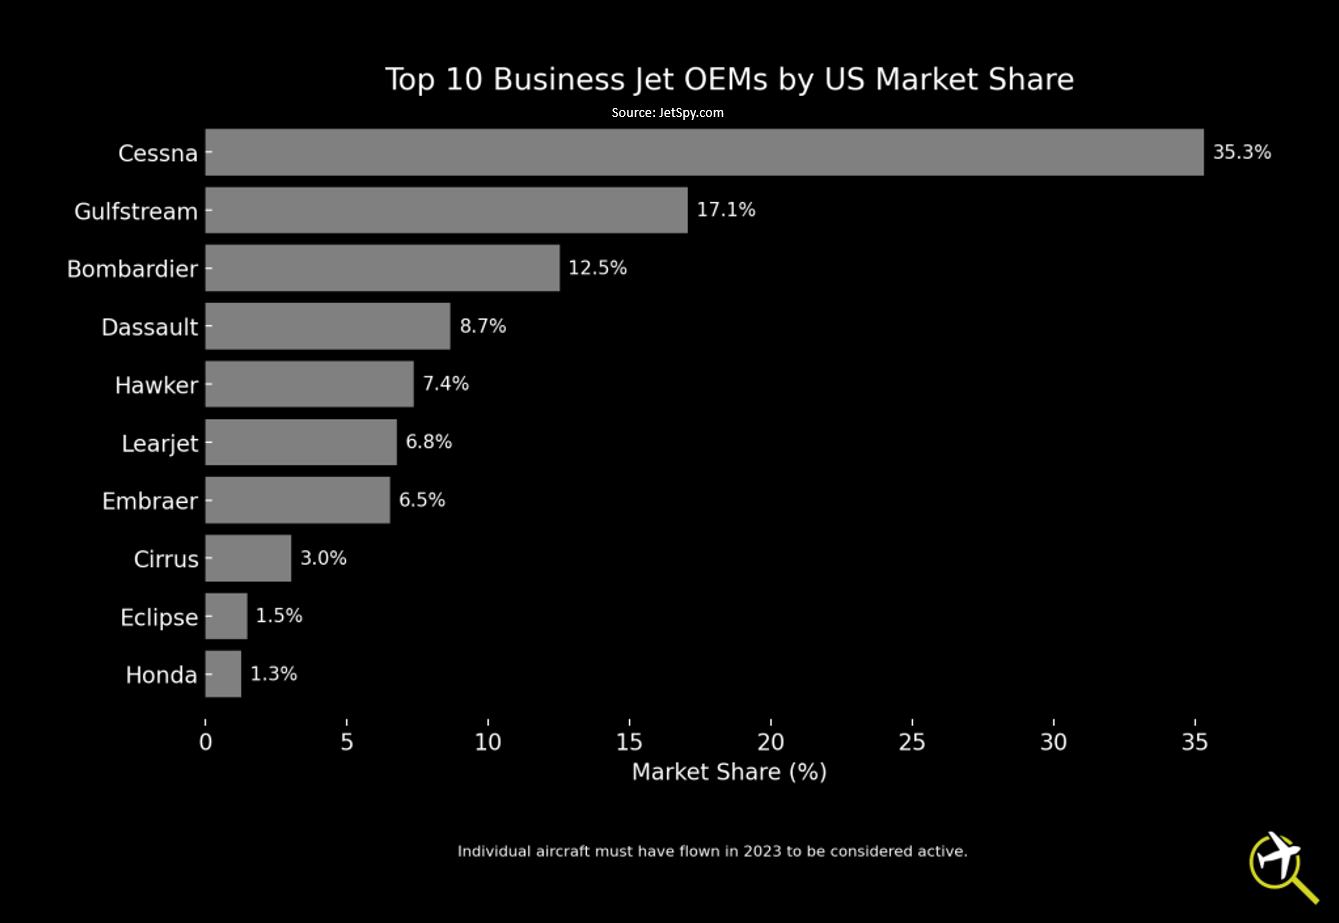 JetSpy Top 10 Business Jet OEMs By US Market Share 